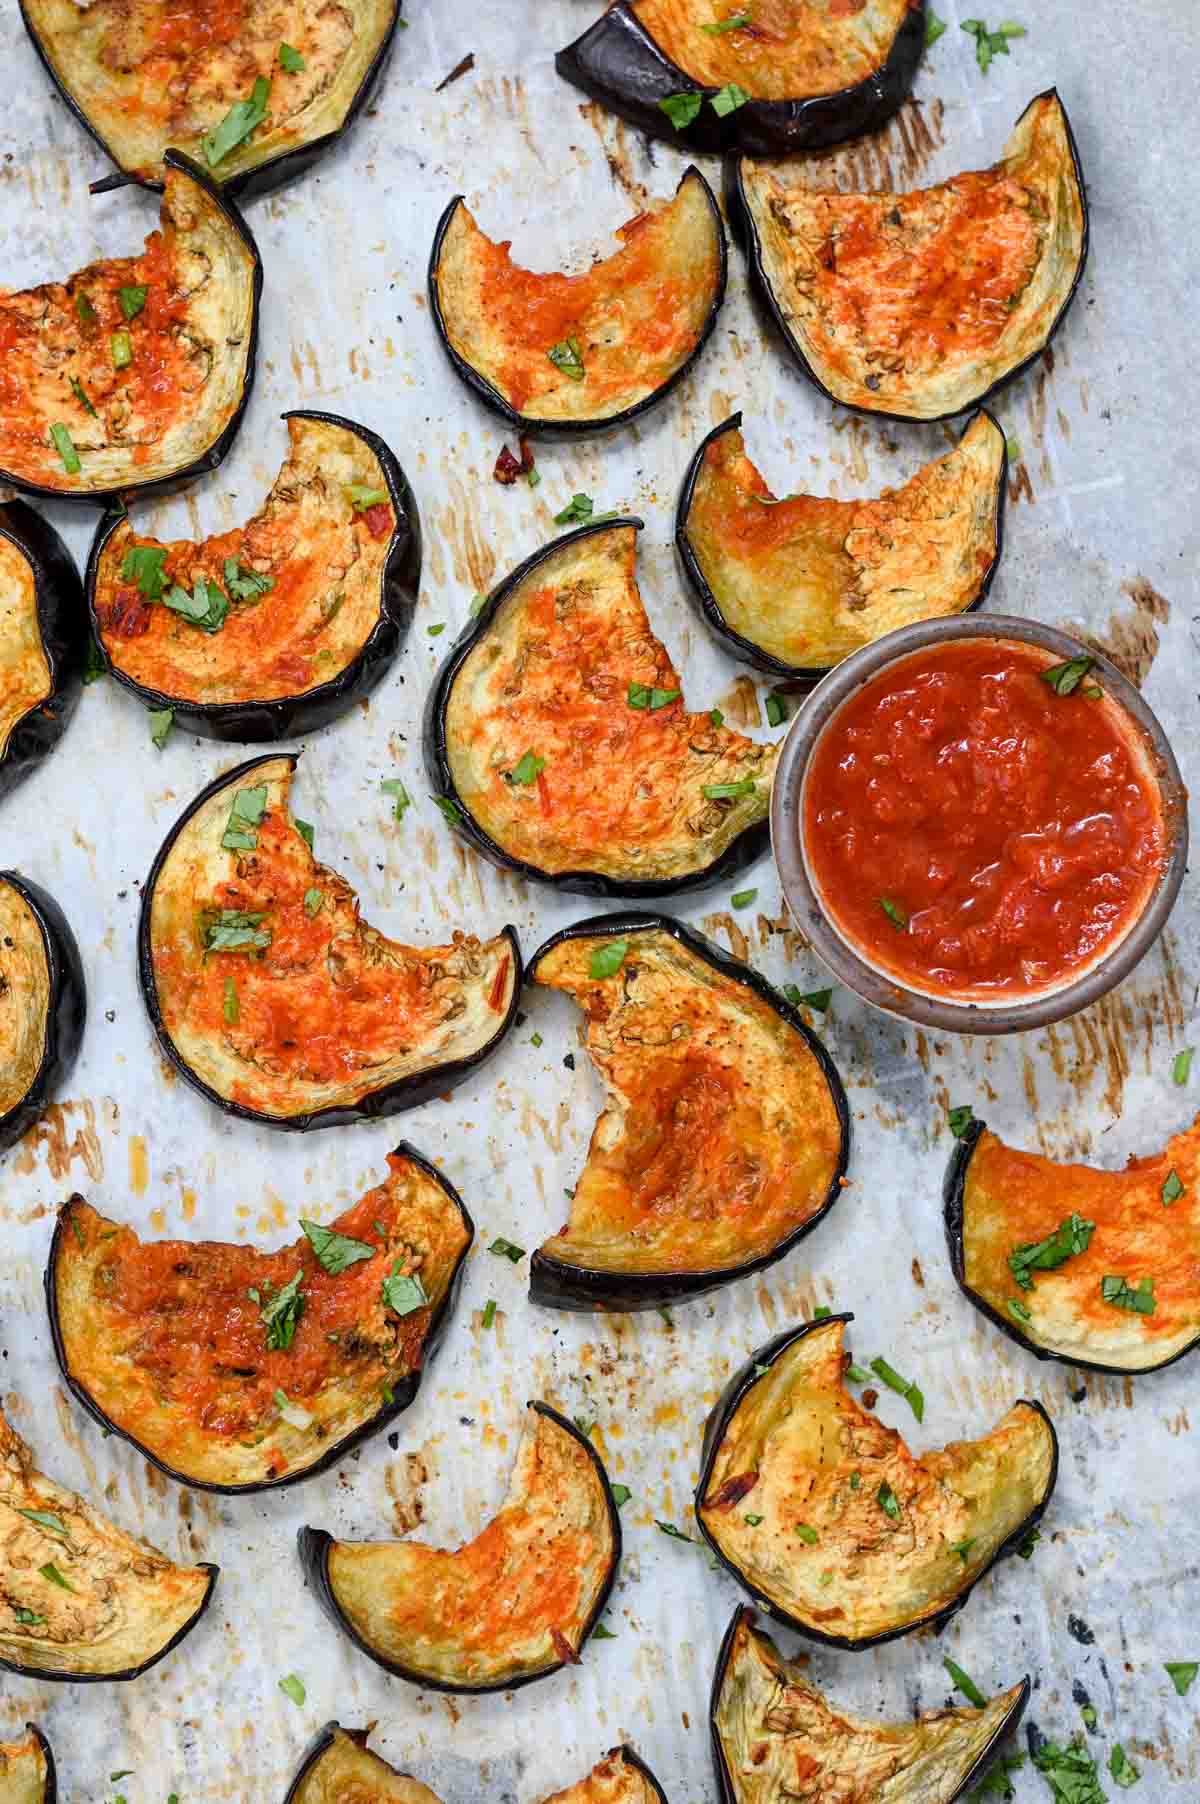 Slices of roasted eggplant on parchment paper next to a small bowl of harissa.